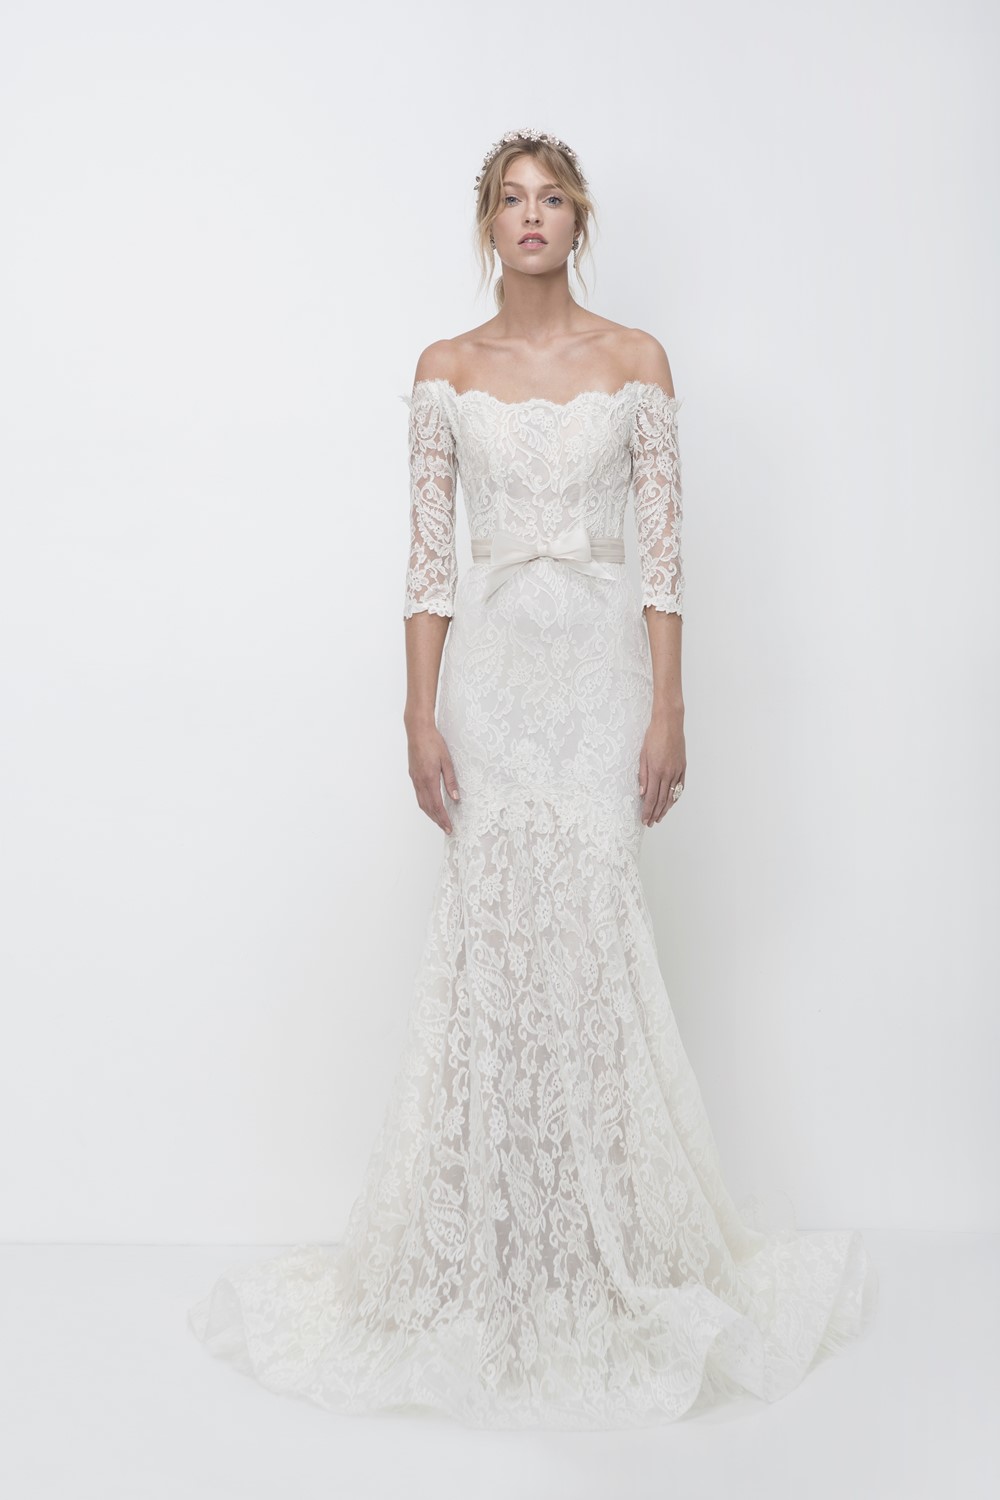 Vanessa Wedding Dress from Lihi Hod's 2018 Bridal Collection